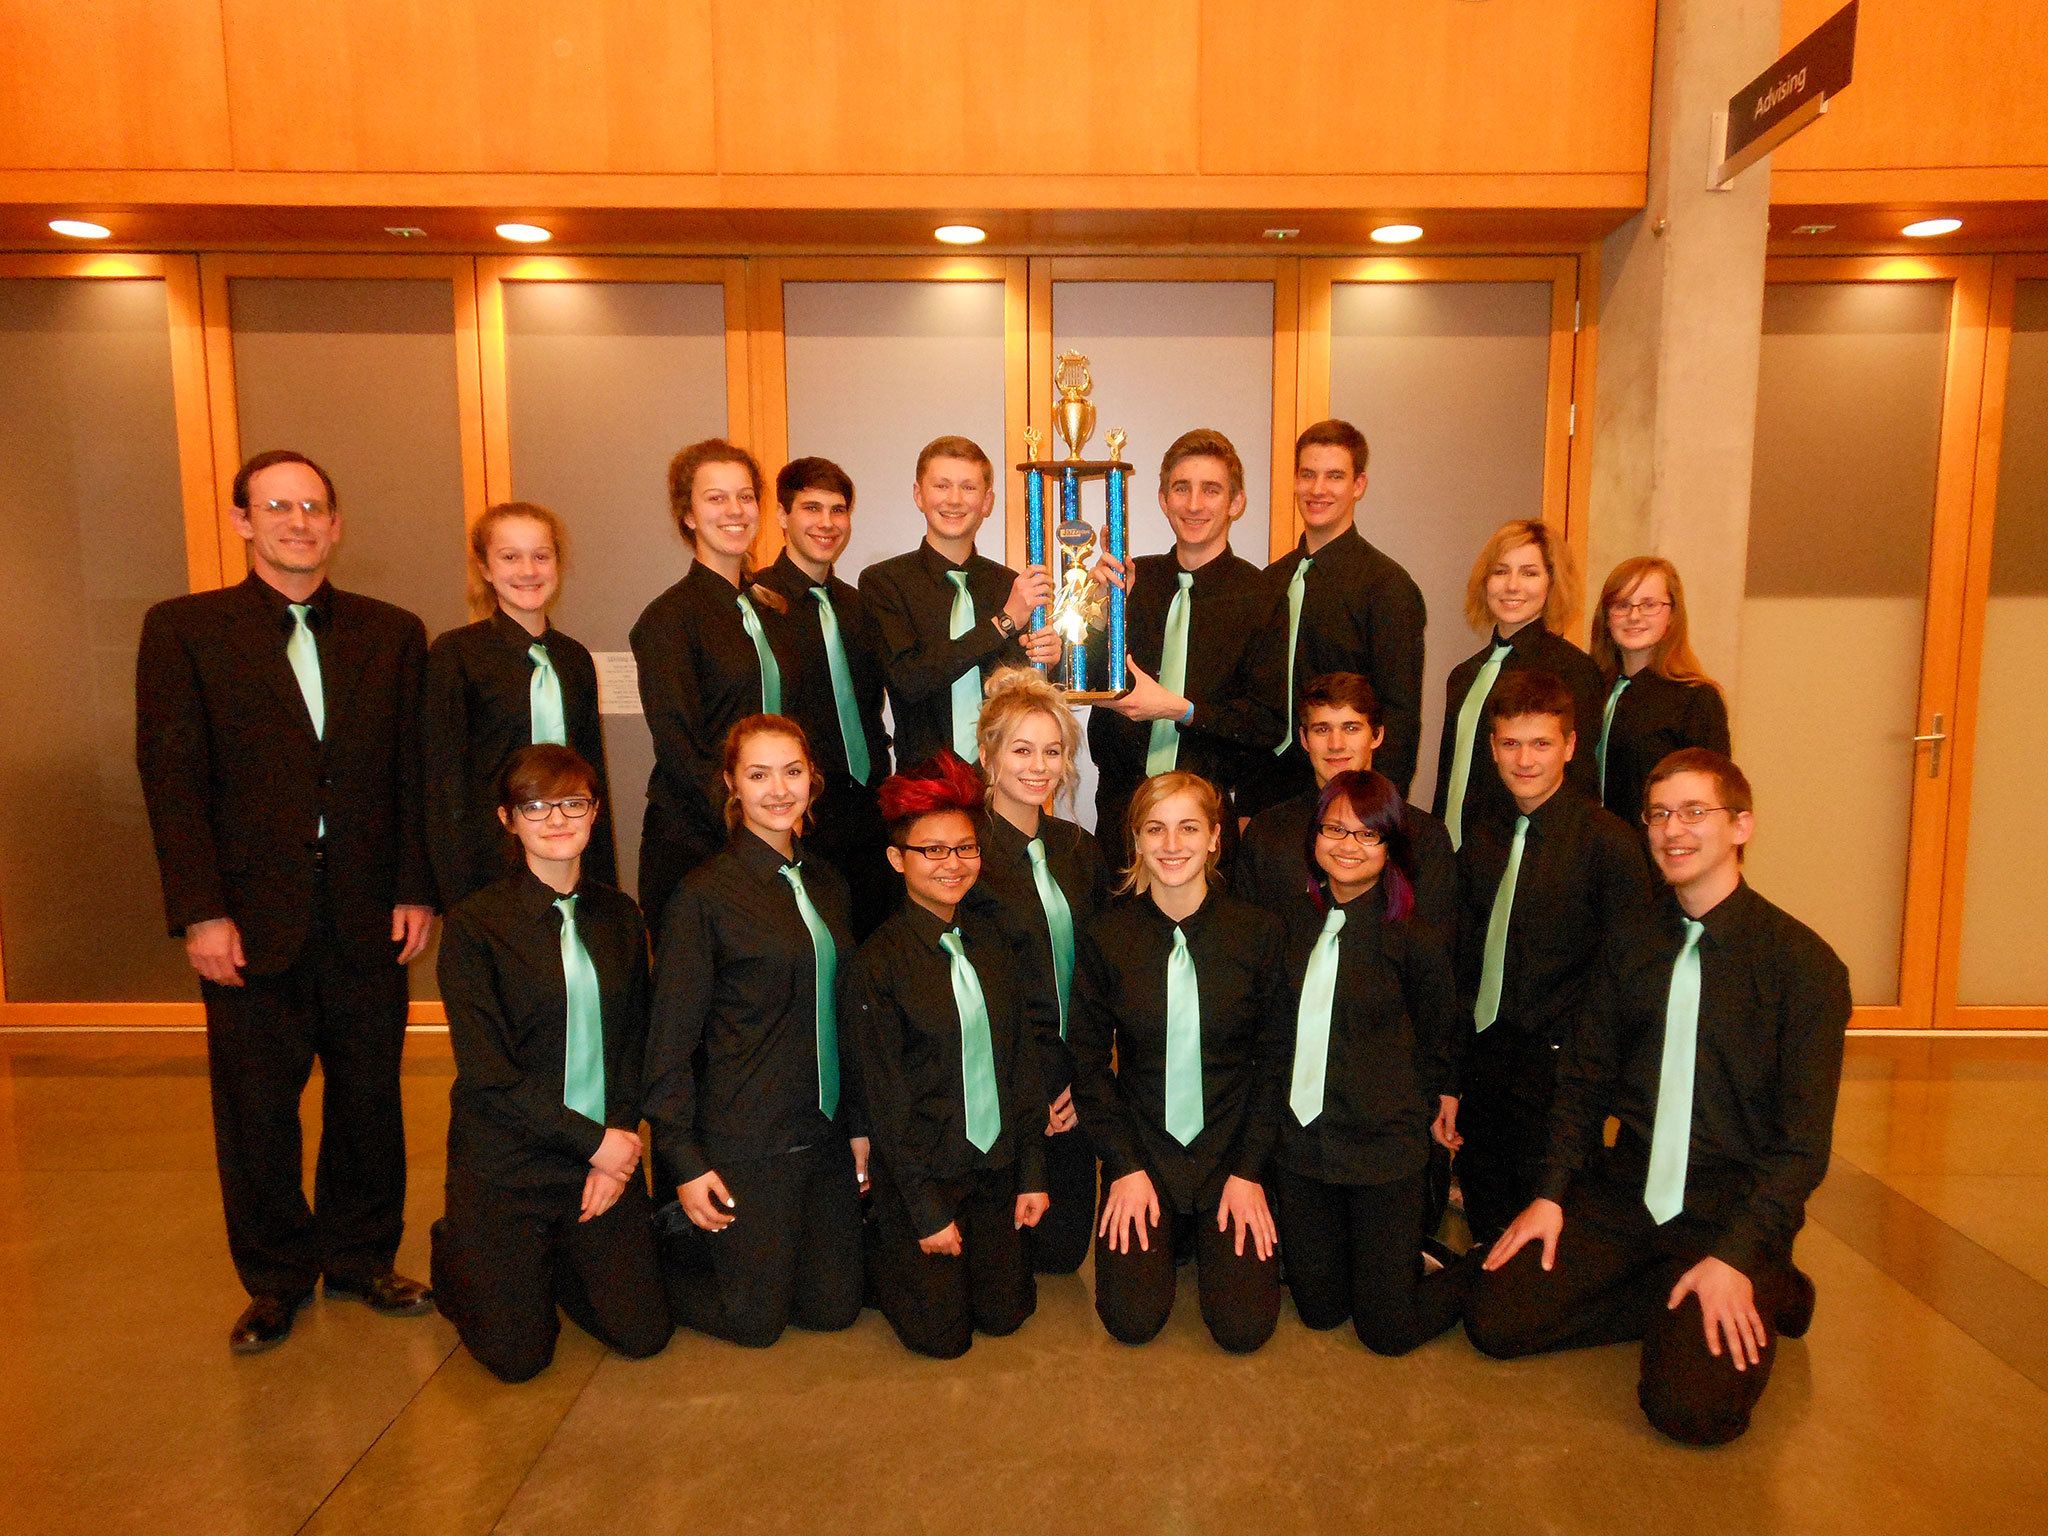 Northwinds jazz band plays its way to the top at festival